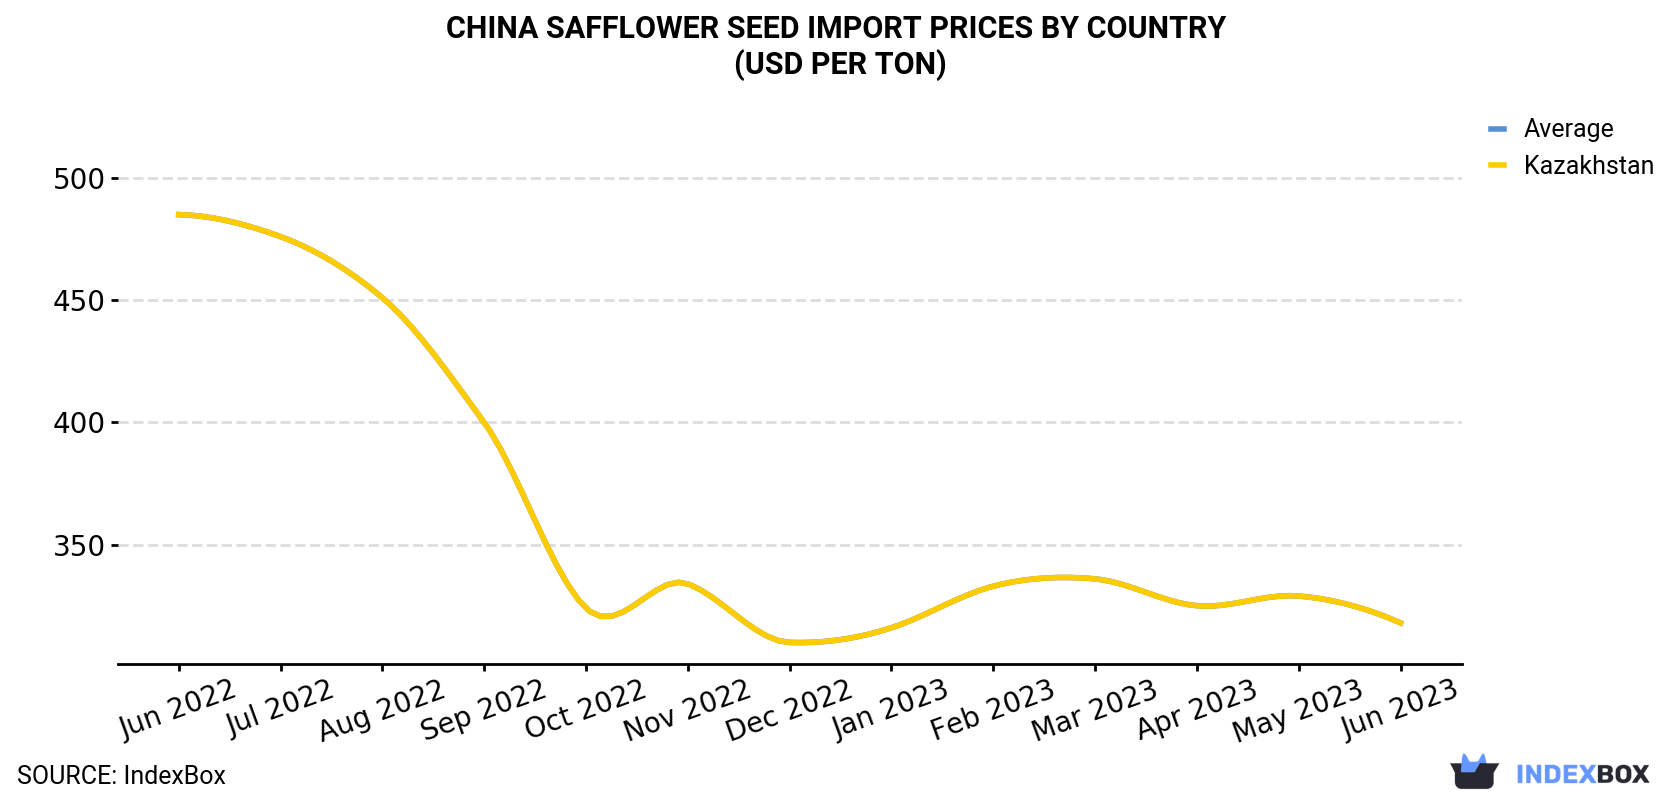 China Safflower Seed Import Prices By Country (USD Per Ton)